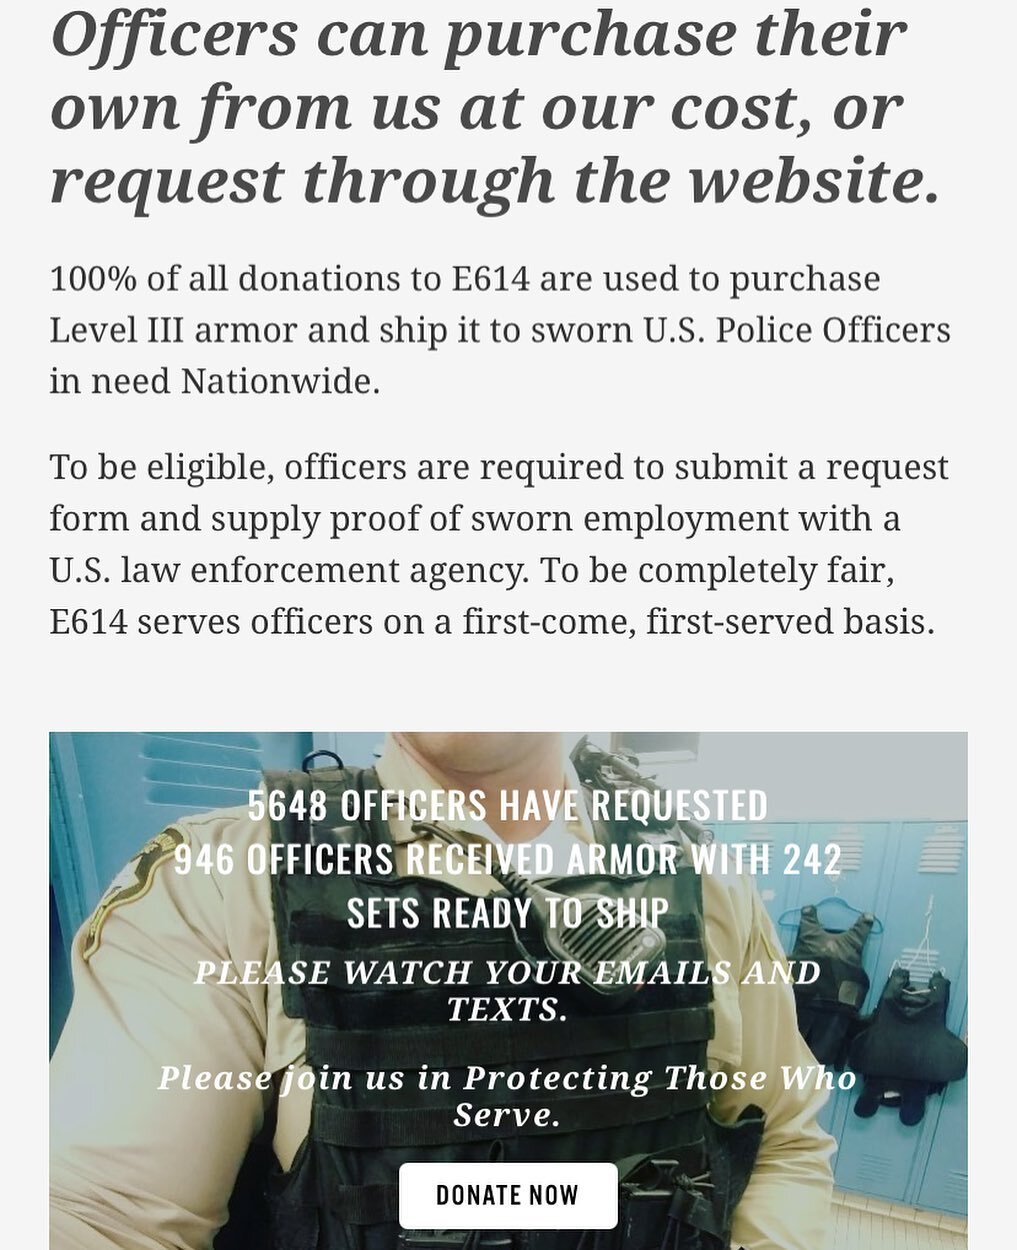 Our site e614.org is up to date on officers served. However, our donation page is broken but the PayPal donate still works! We are working diligently to get it fixed and will let you guys know when It is. Everyone have an awesome, SAFE weekend! 
#e61